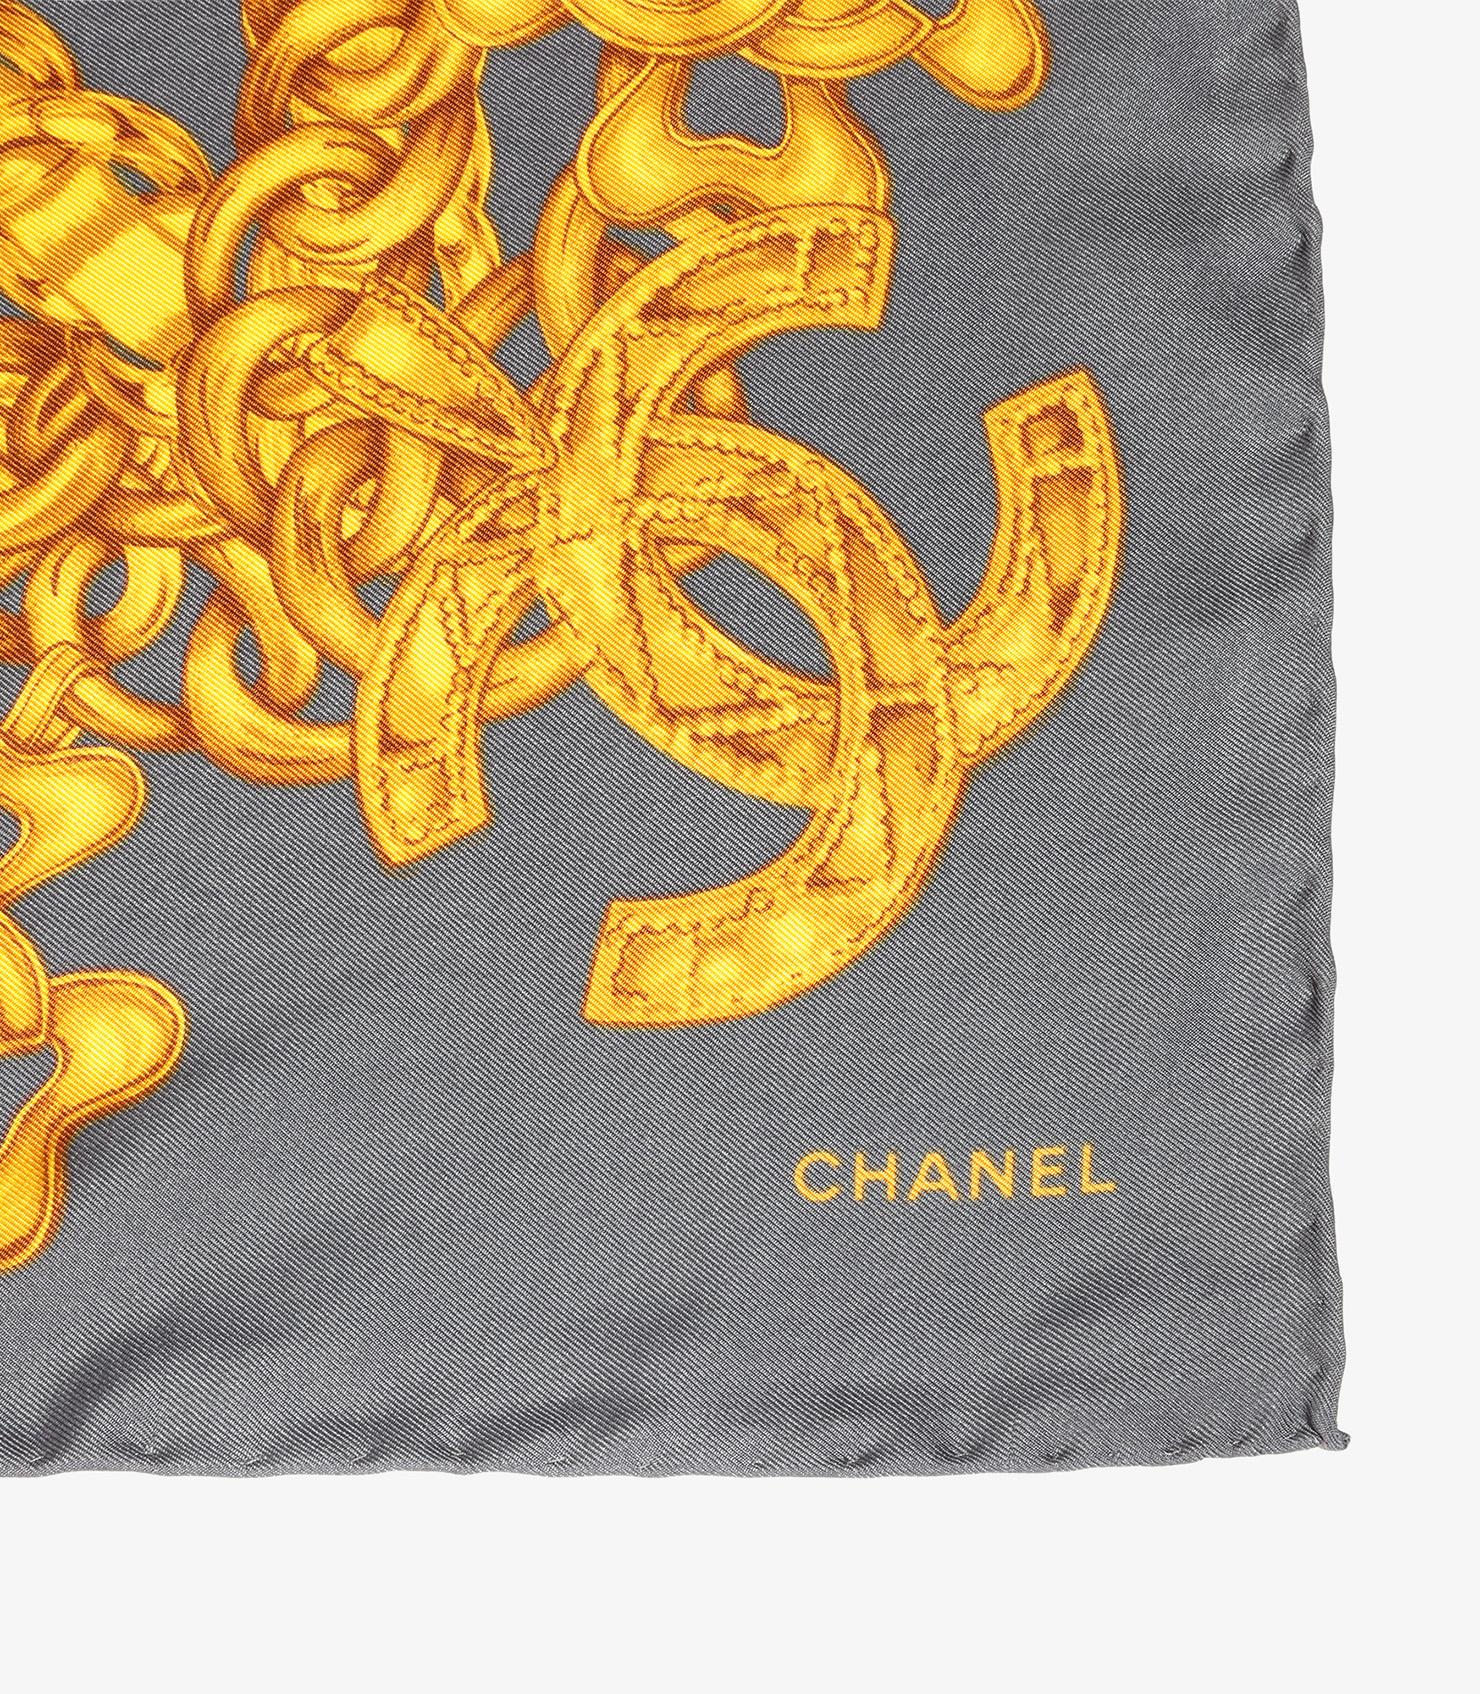 Chanel Dusty Navy & Gold Silk Vintage CC Chain Scarf

CONDITION NOTES
The exterior is excellent condition with light signs of use.
Overall this bag is in excellent pre-owned condition. Please note the majority of the items we sell are pre-loved